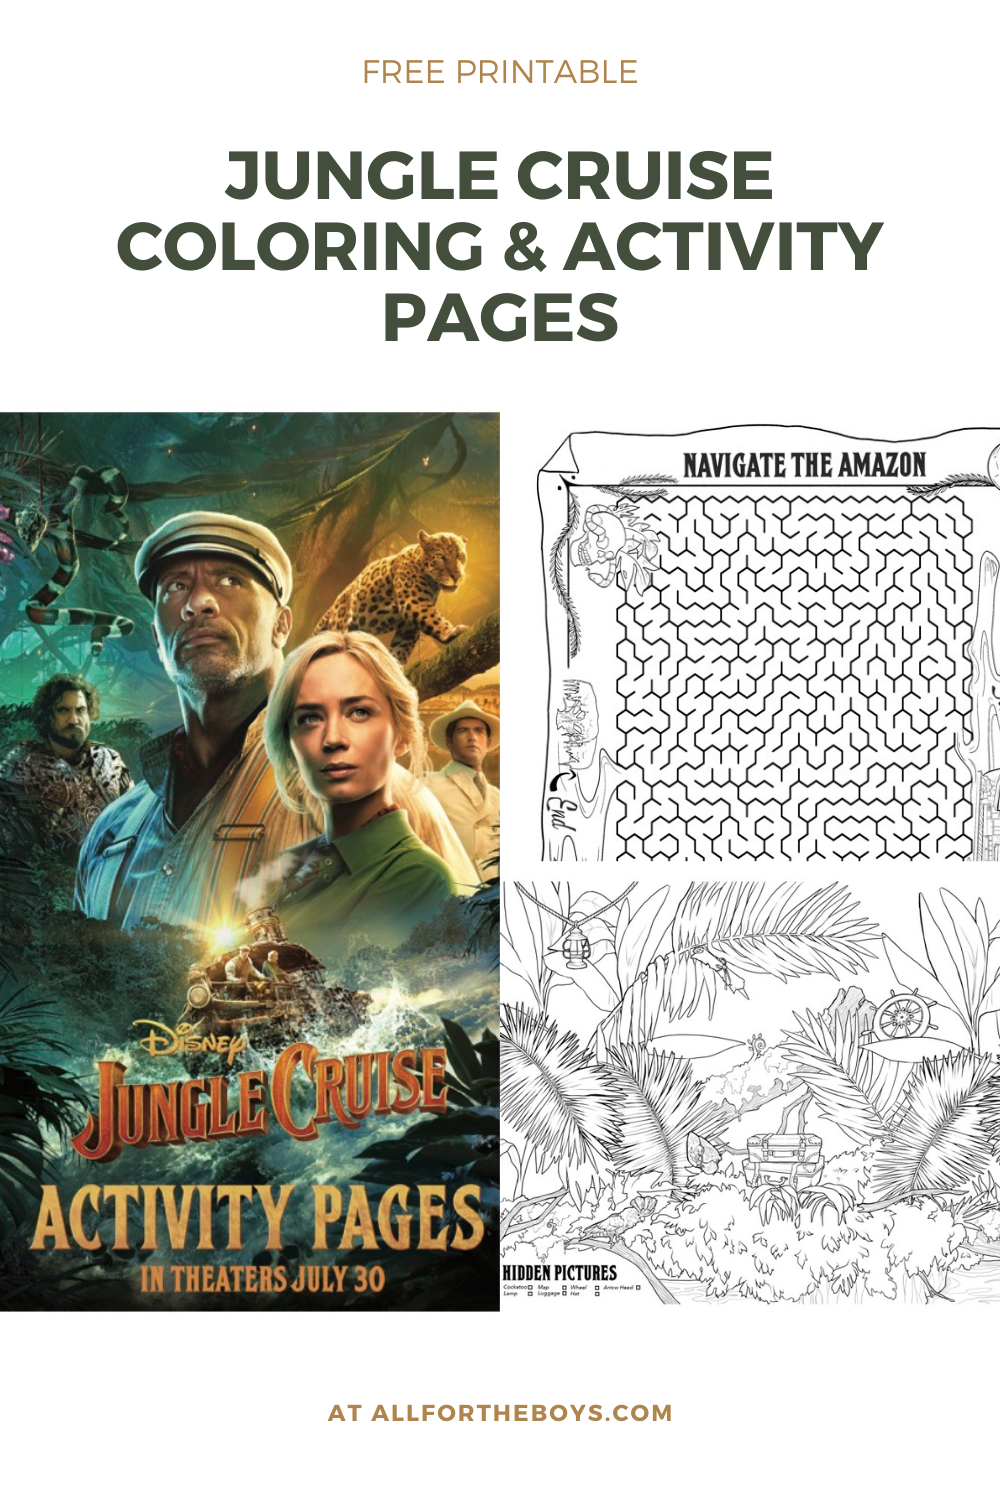 Jungle Cruise printable activity and coloring sheets